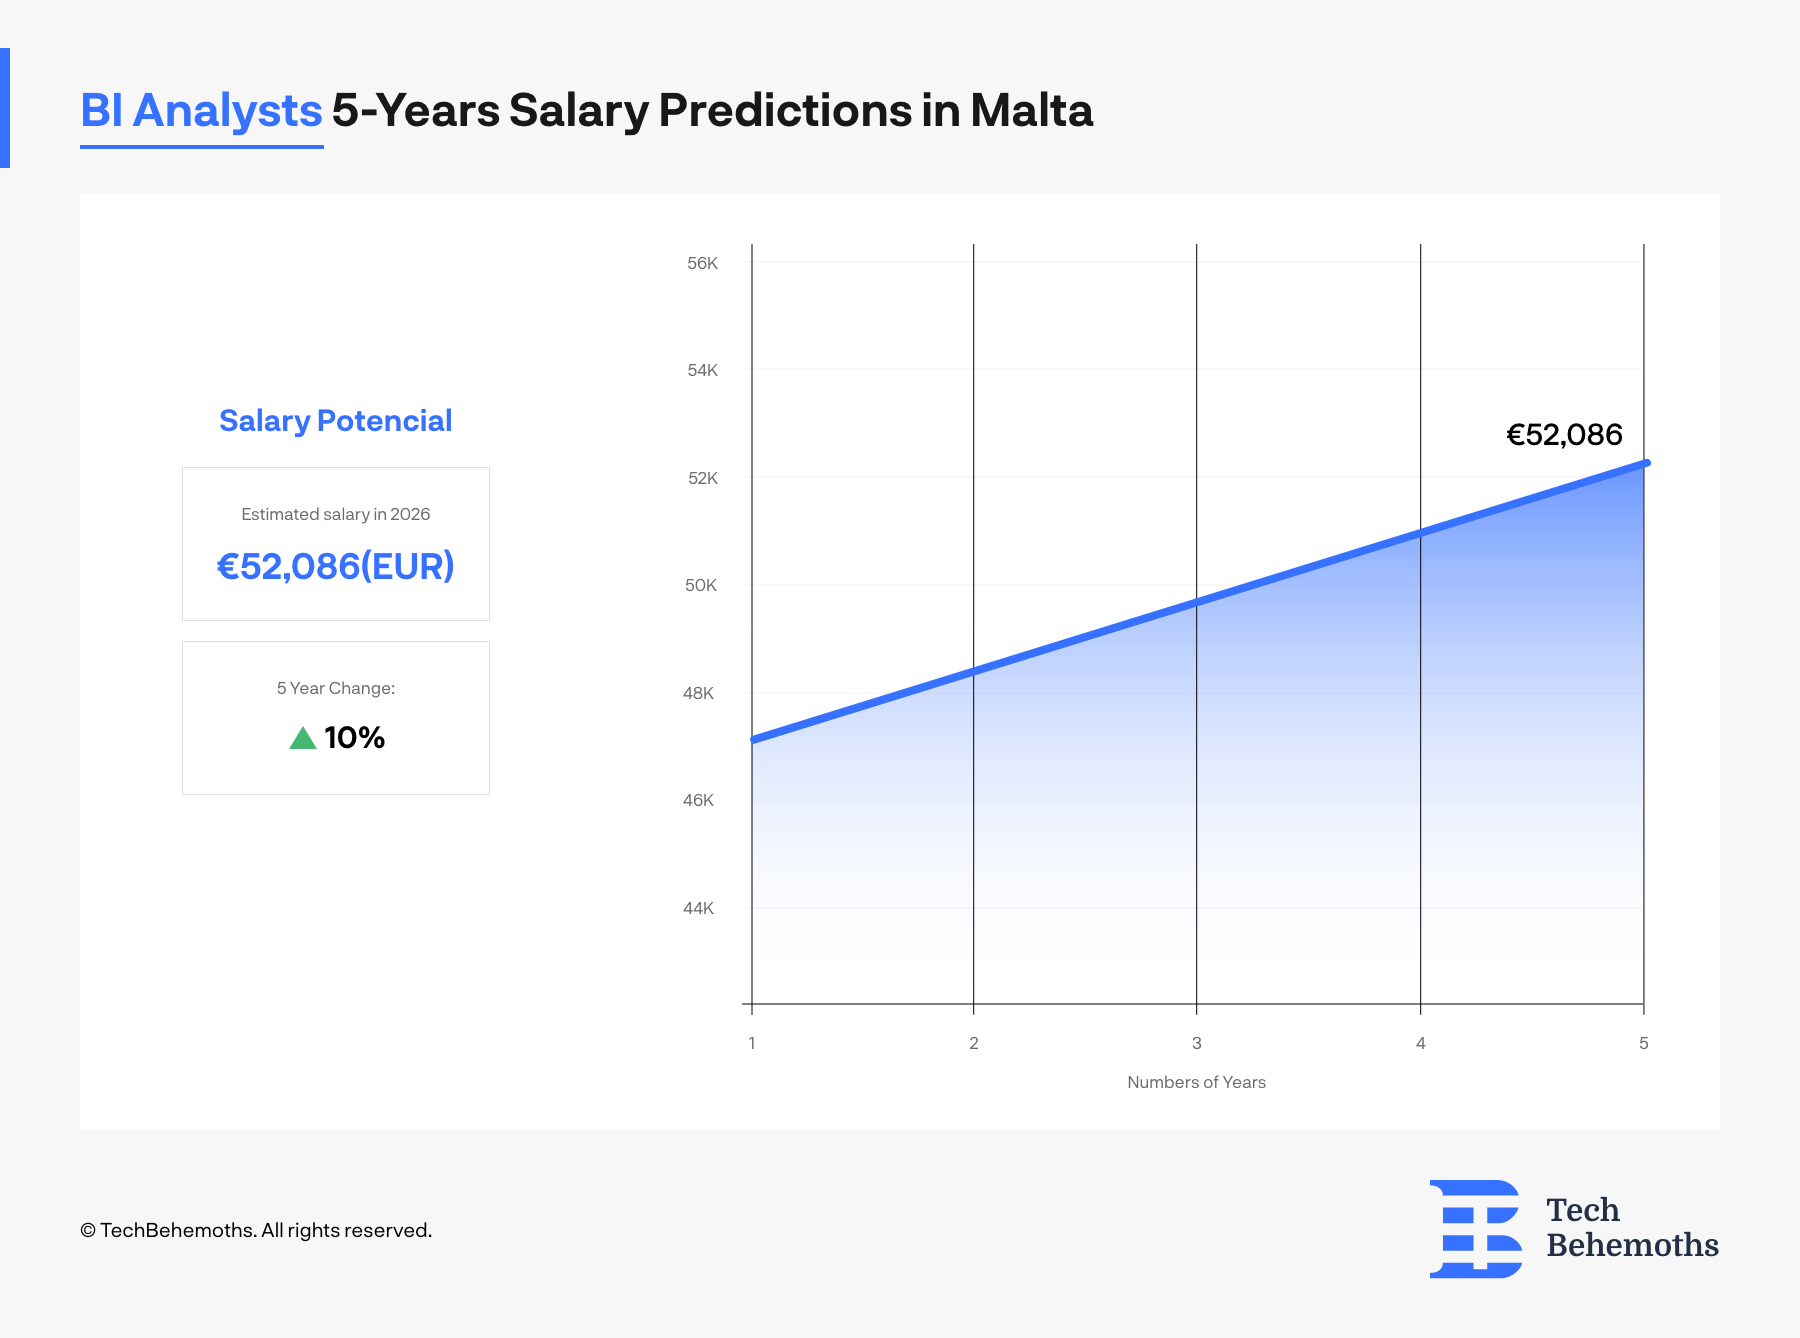 5 year salary predictions for BI analysts in malta